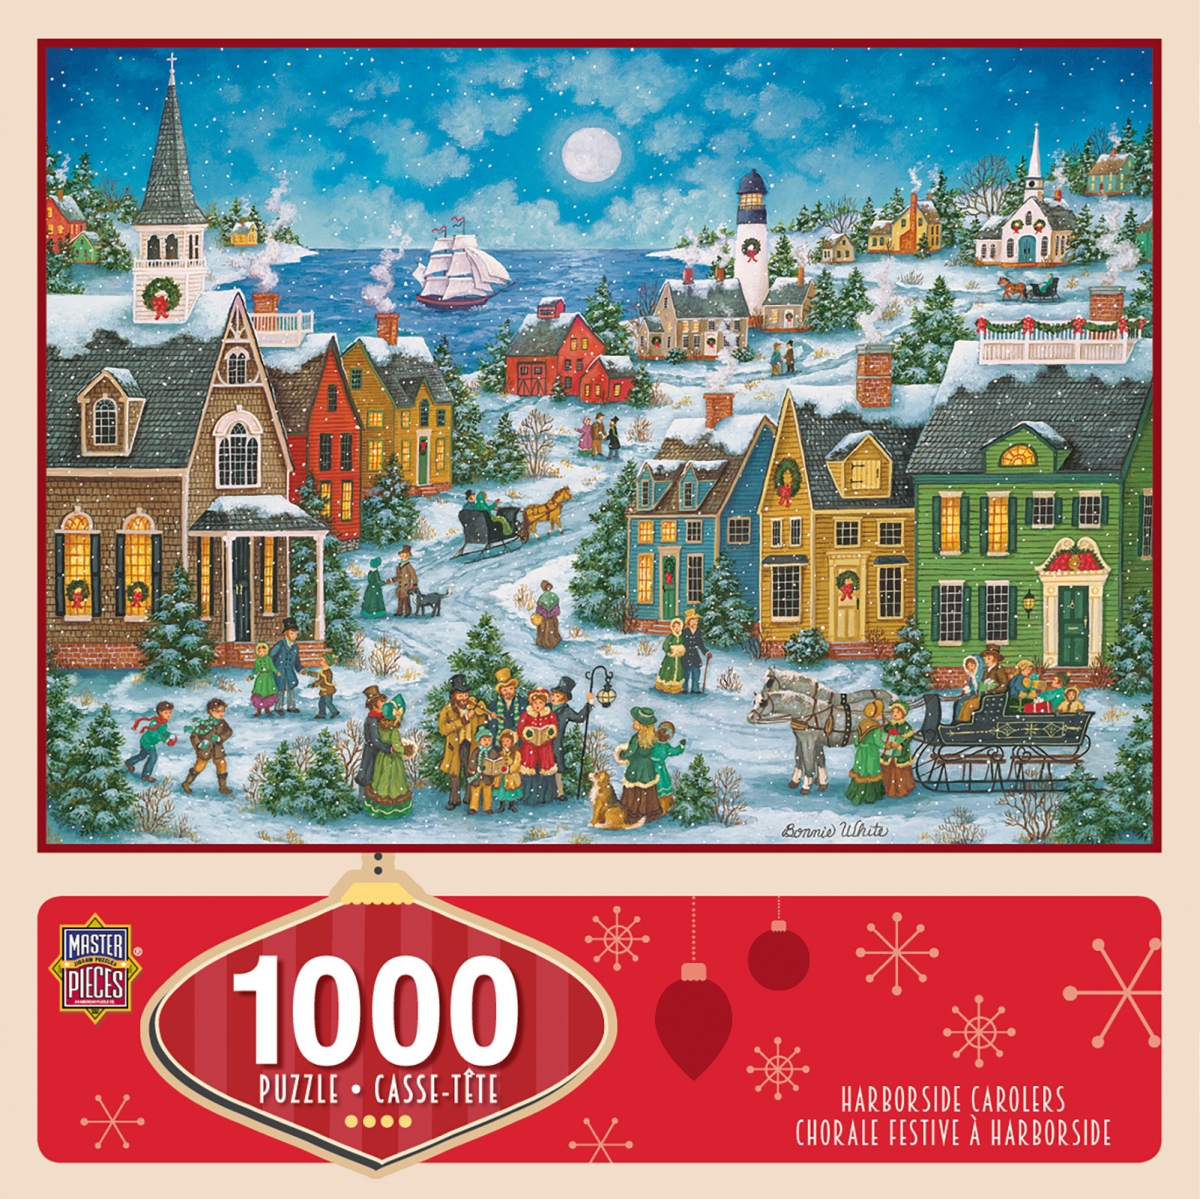 71674 19.25 X 26.75 In. Bonnie White Holiday Harbor Side Carolers Singing Carolers Jigsaw Puzzle - 1000 Piece